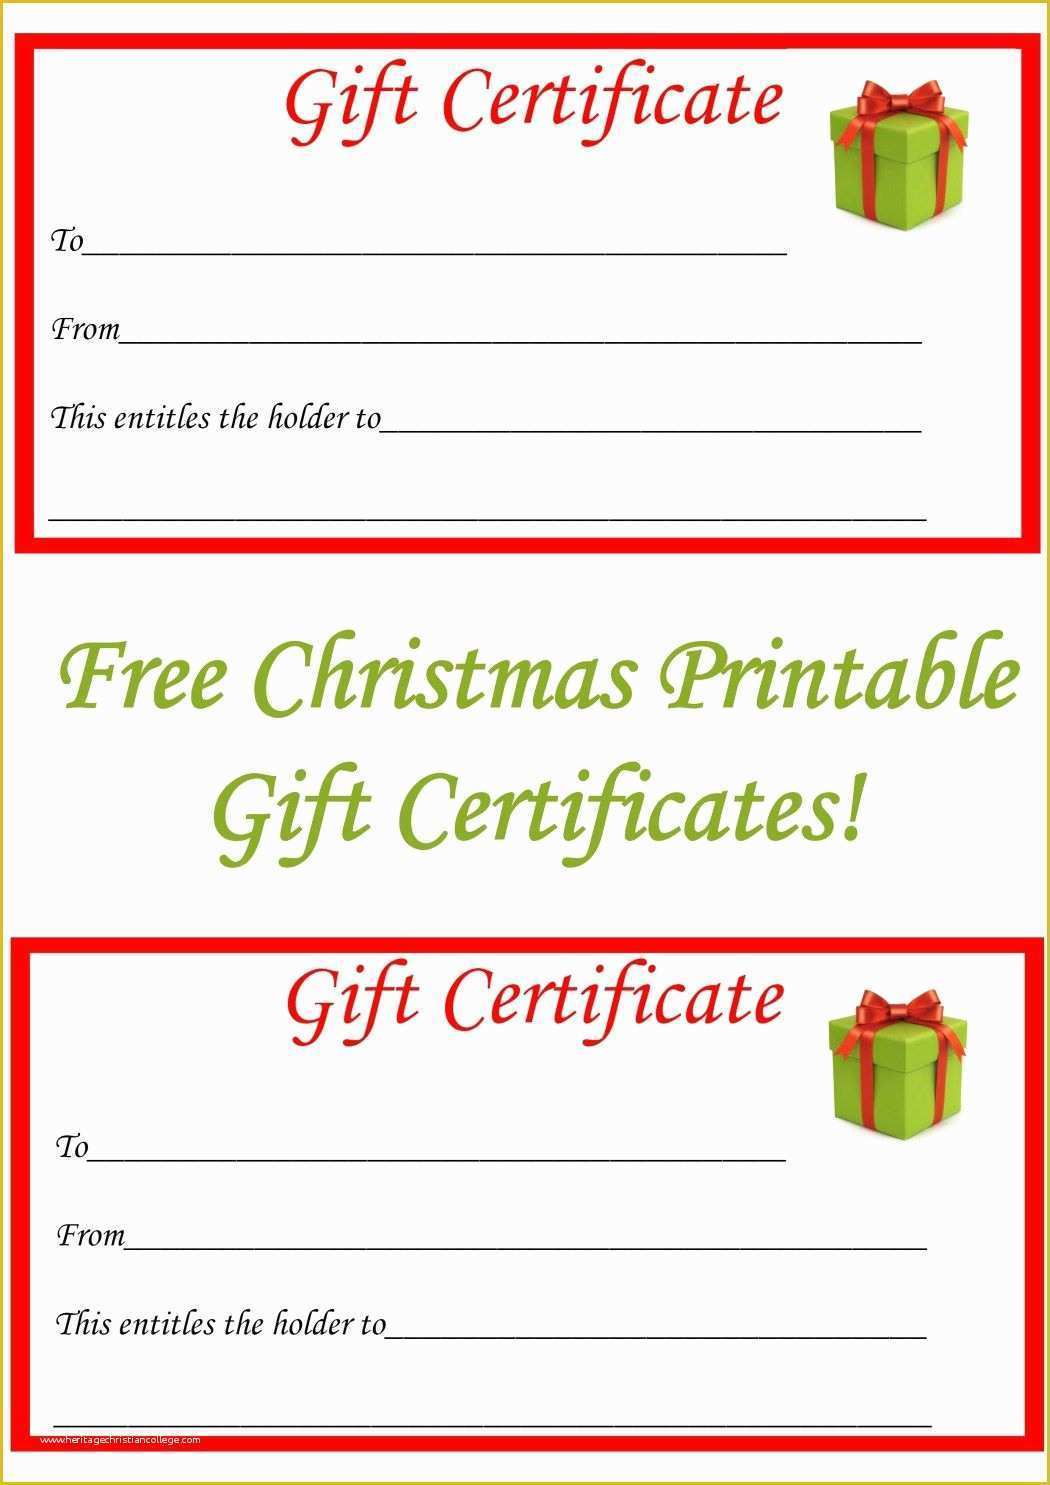 Gift Certificate Template Free Of Best 25 Printable T Certificates Ideas On Pinterest